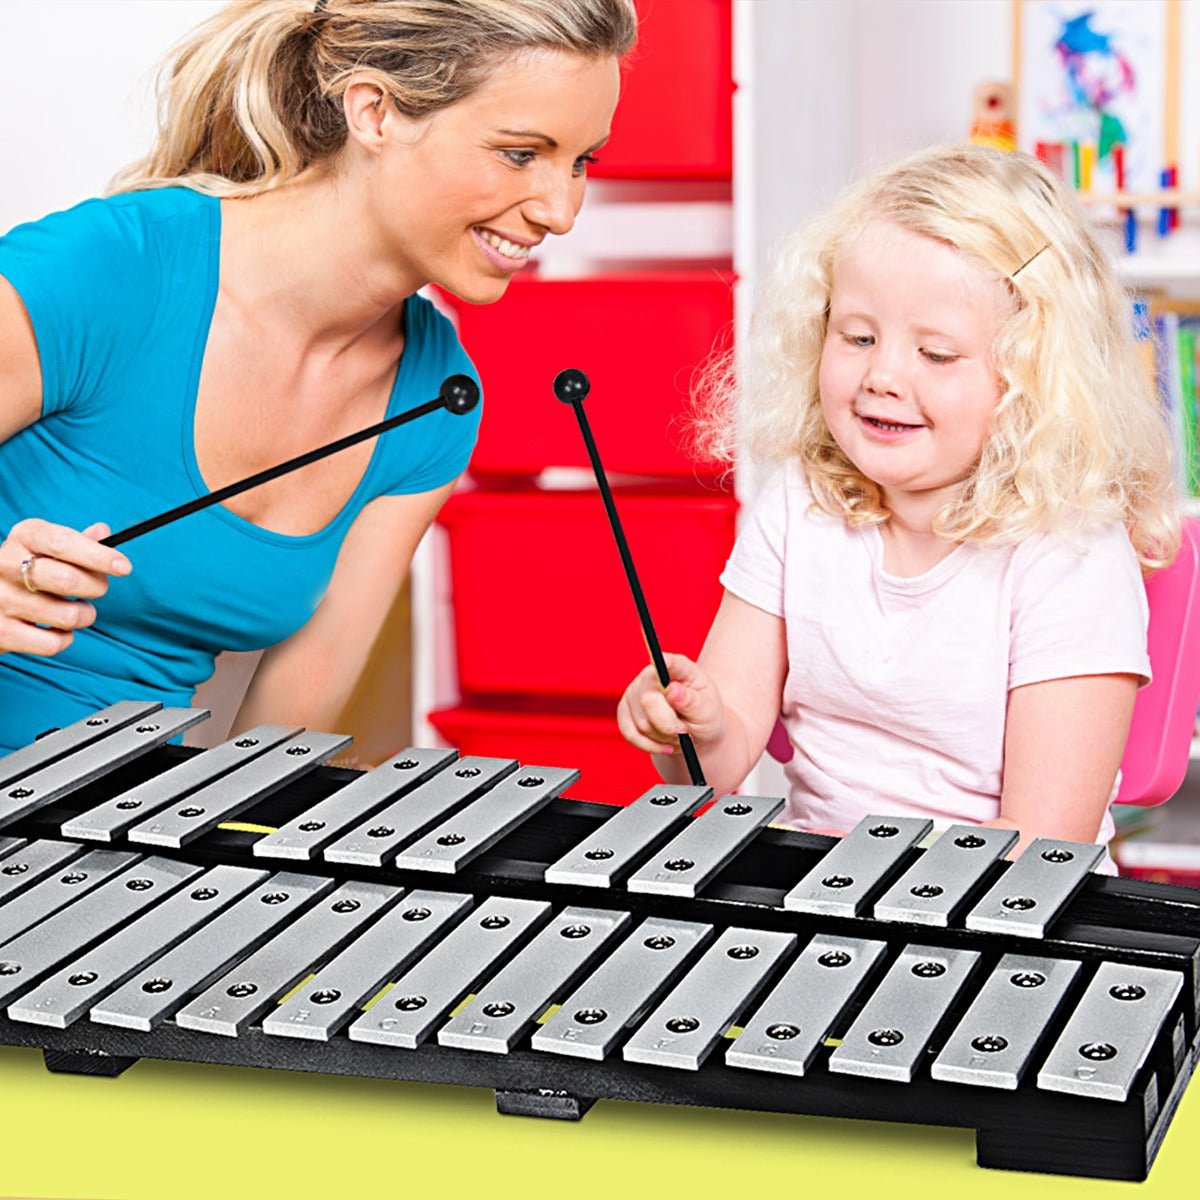 Enchanted Melodies: 30 Note Glockenspiel Xylophone with Metal Keys for Kids